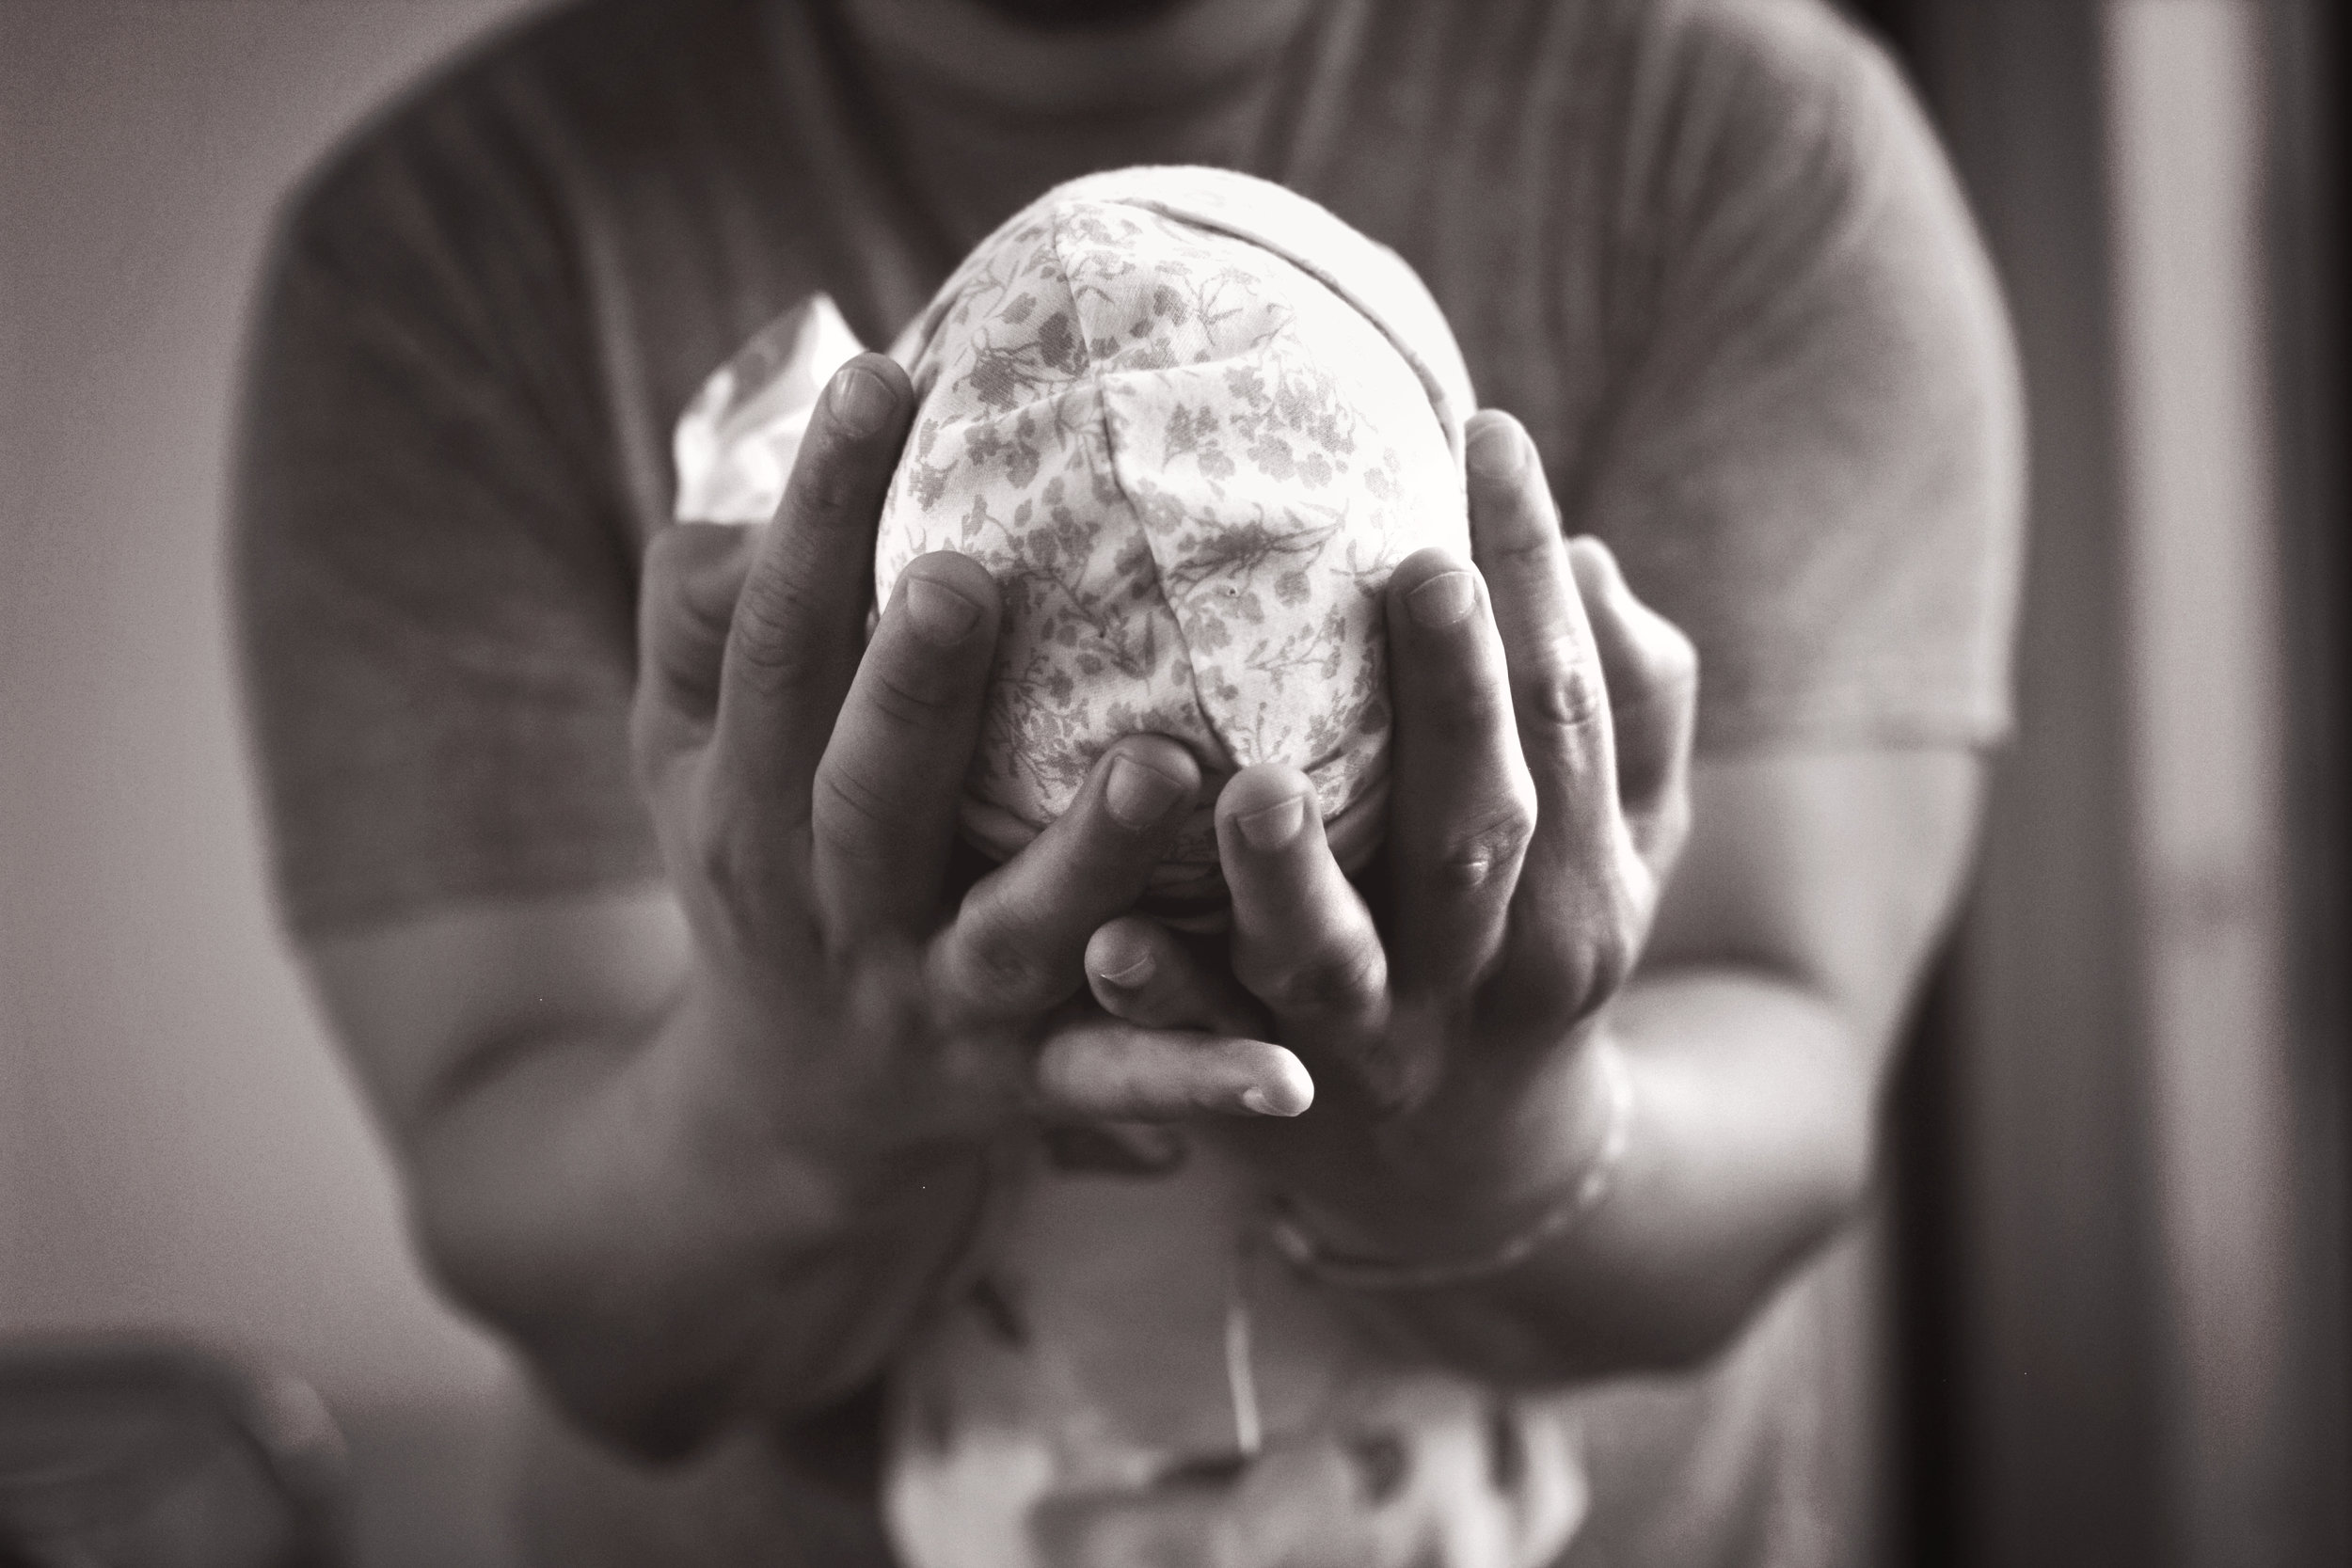 He's got the whole world in his hands | Orange County Newborn Photographer